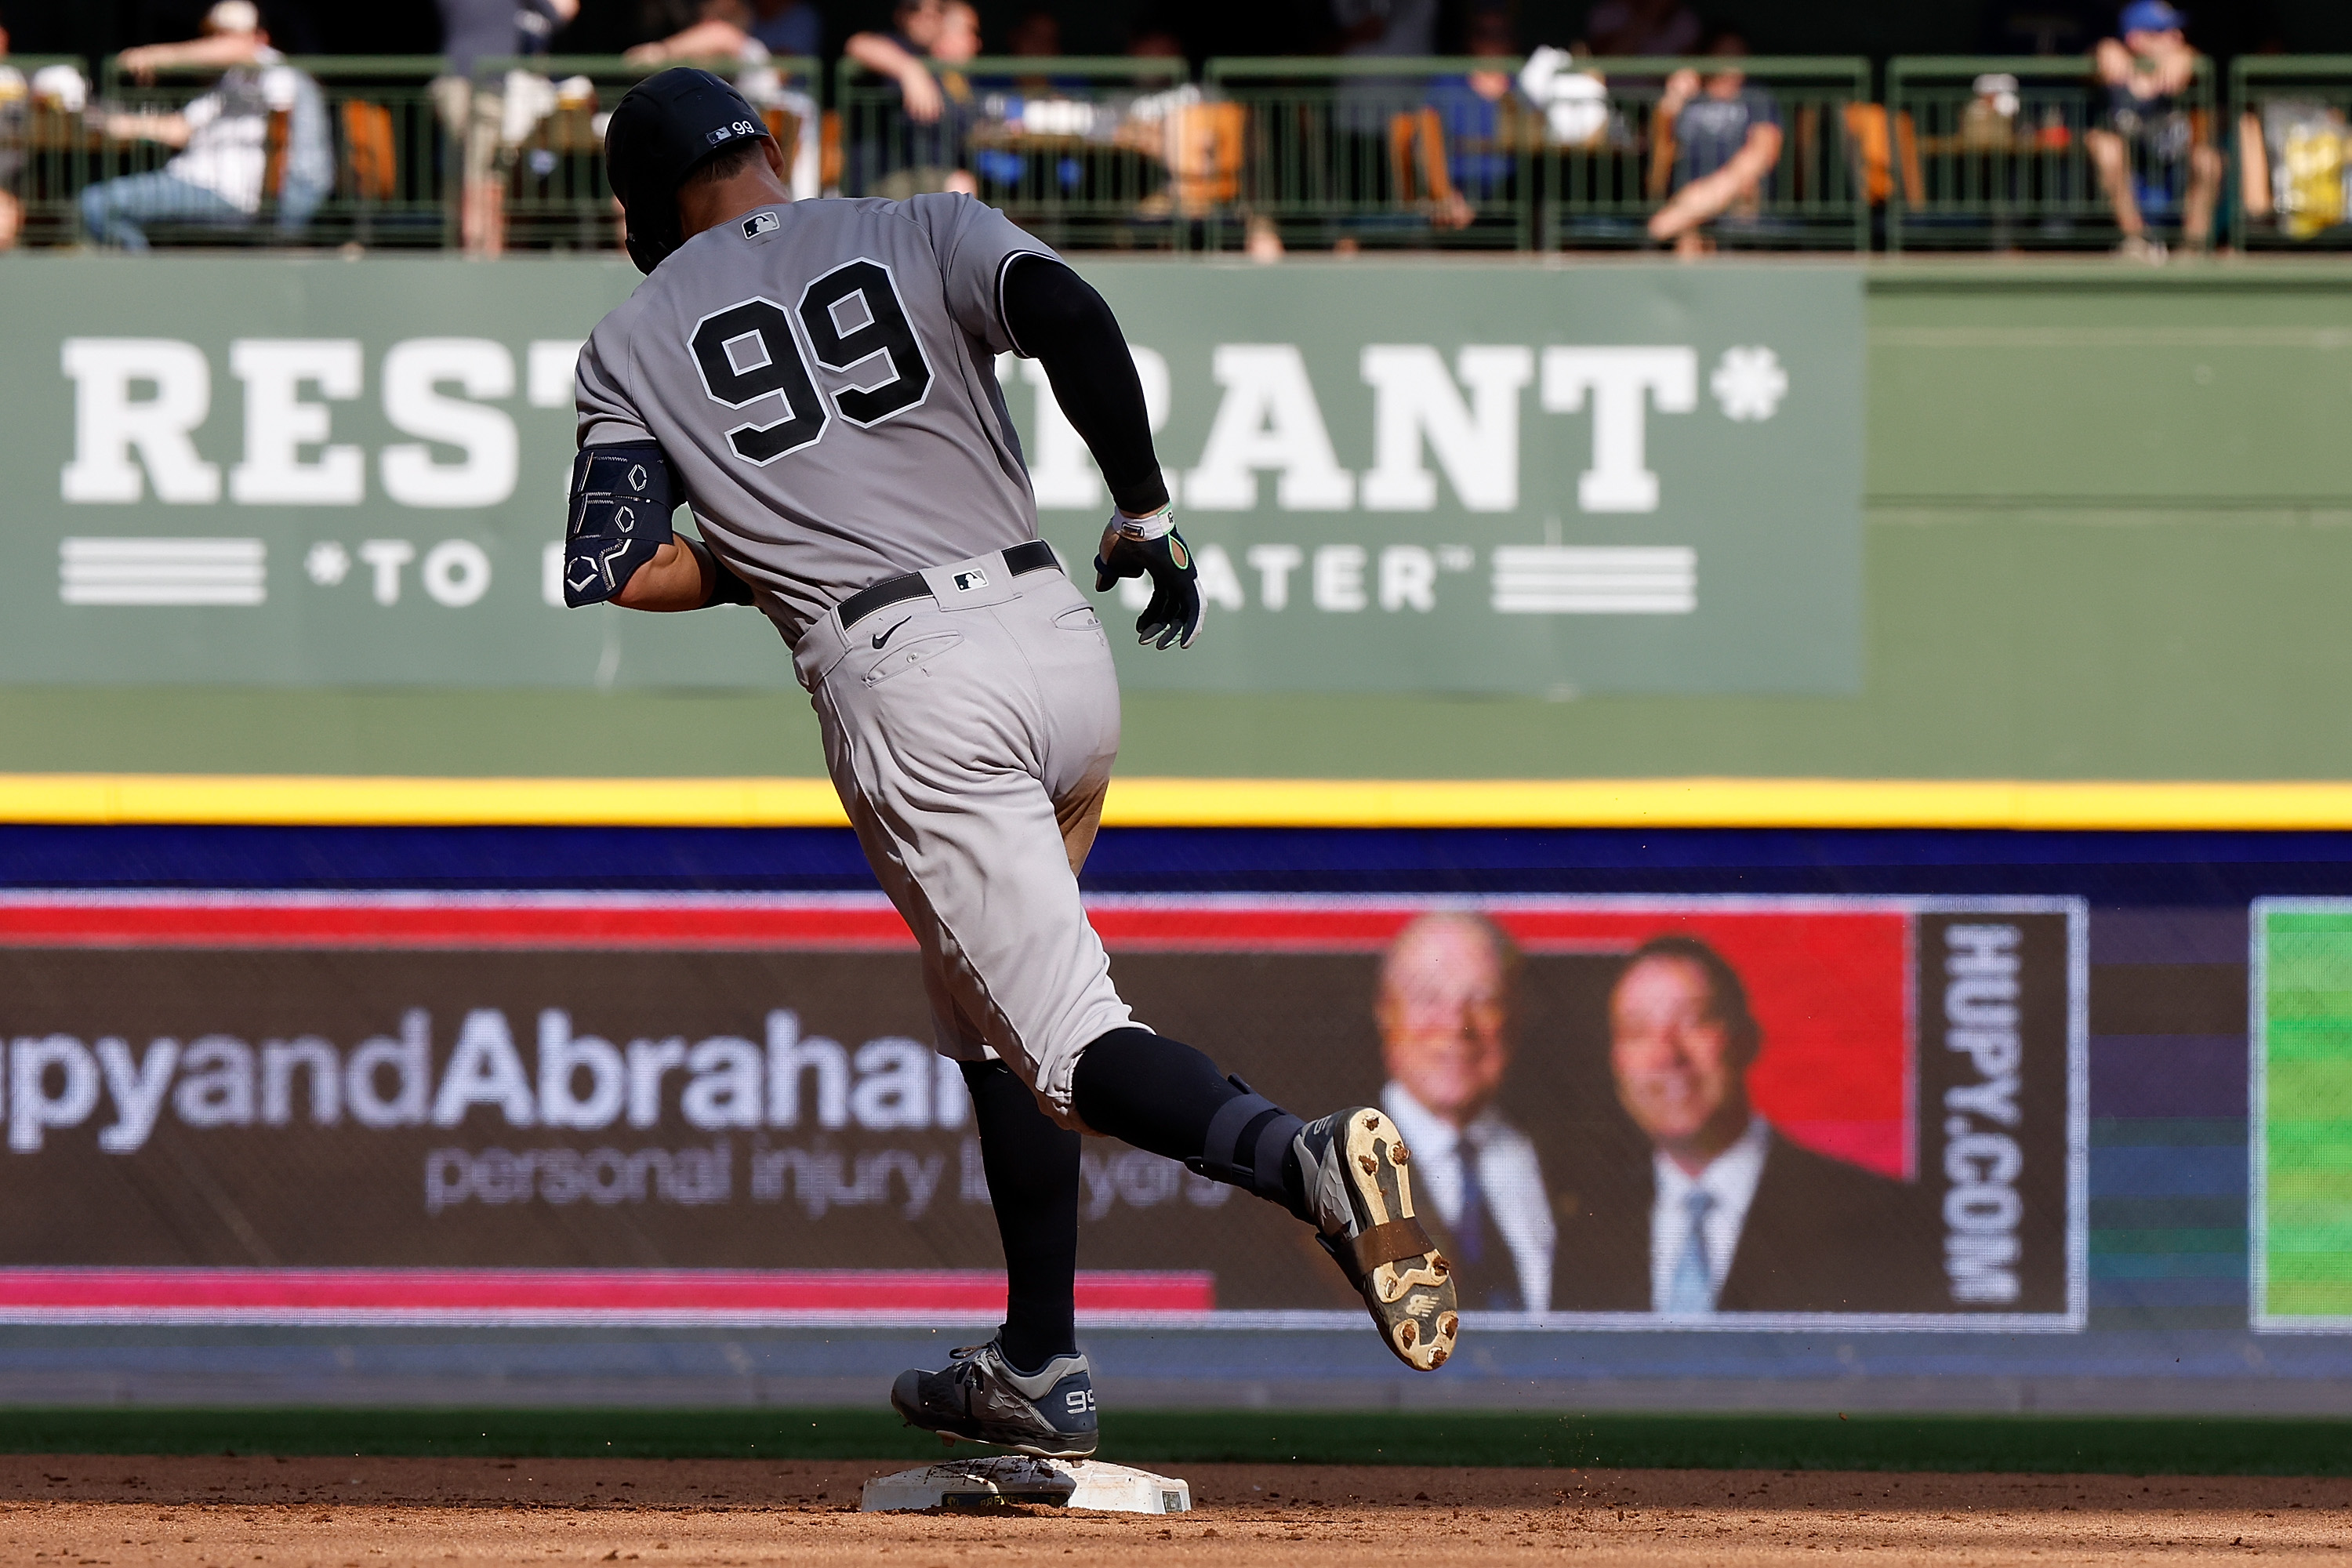 Aaron Judge's record quest reminds us of what the home run chase